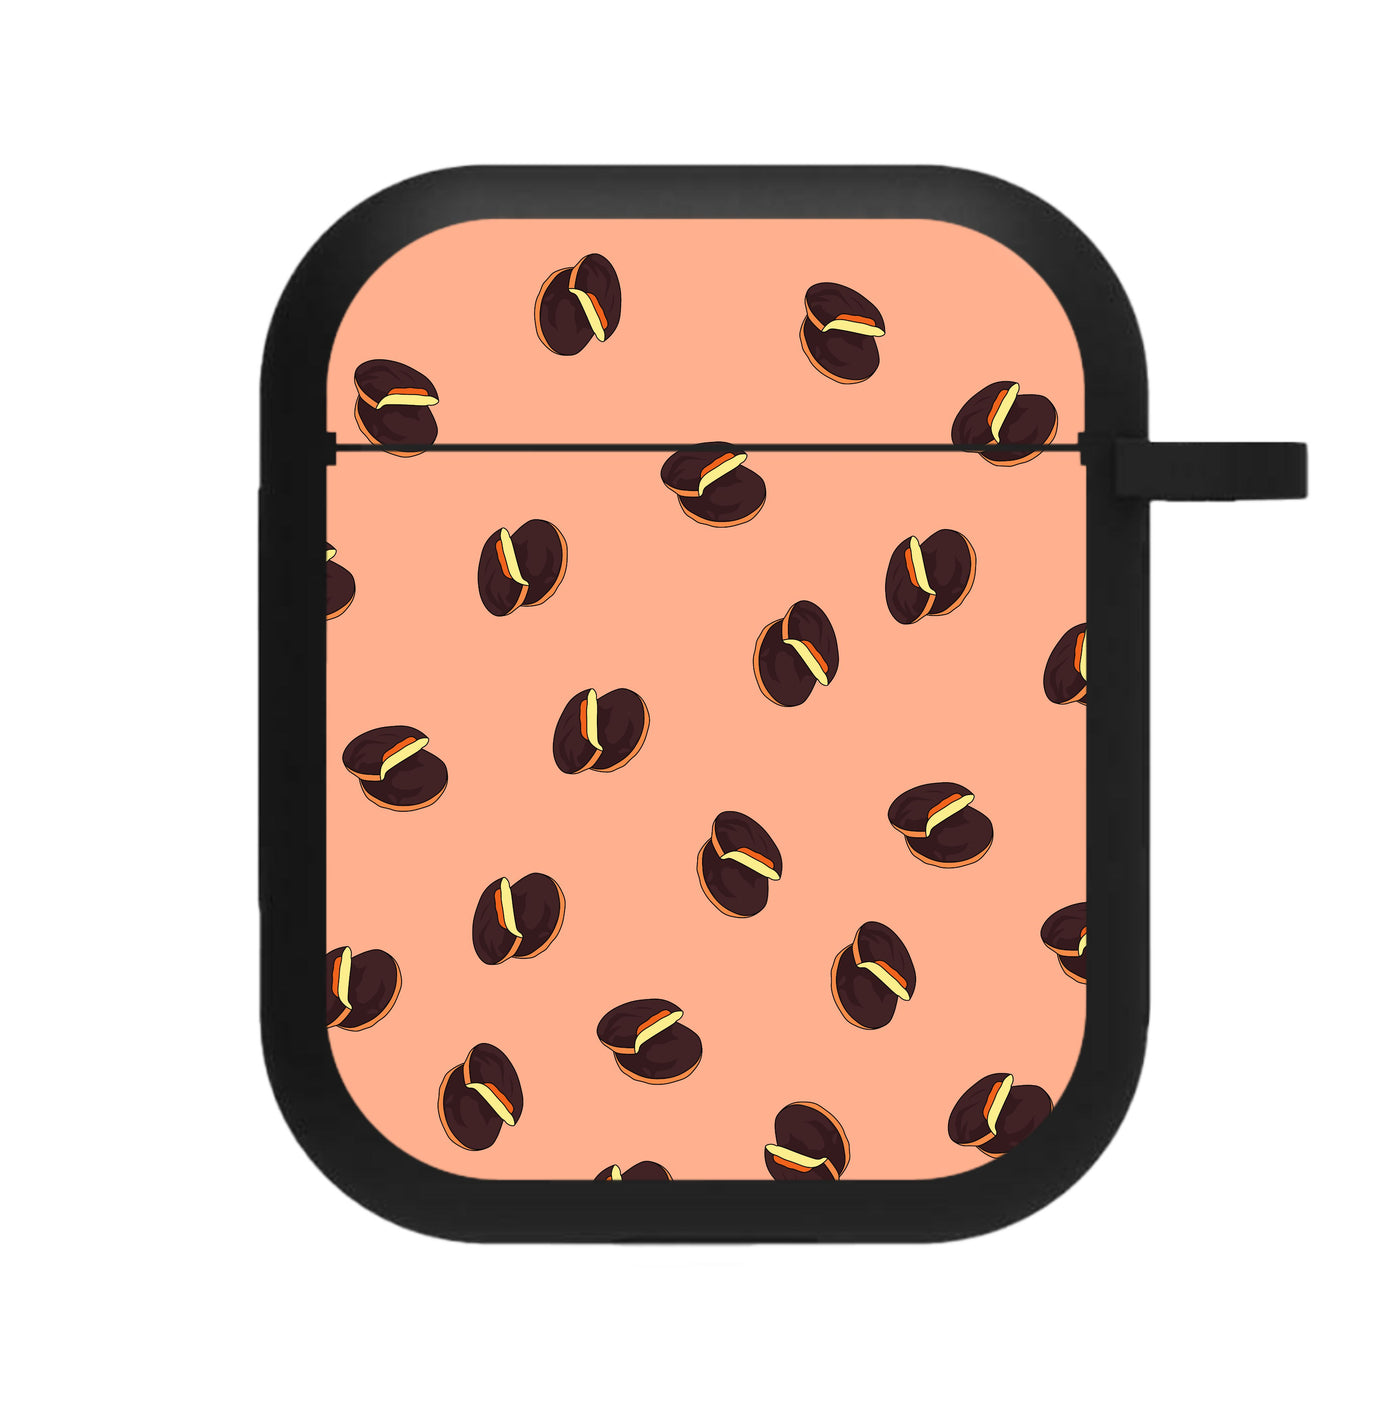 Jaffa Cakes - Biscuits Patterns AirPods Case